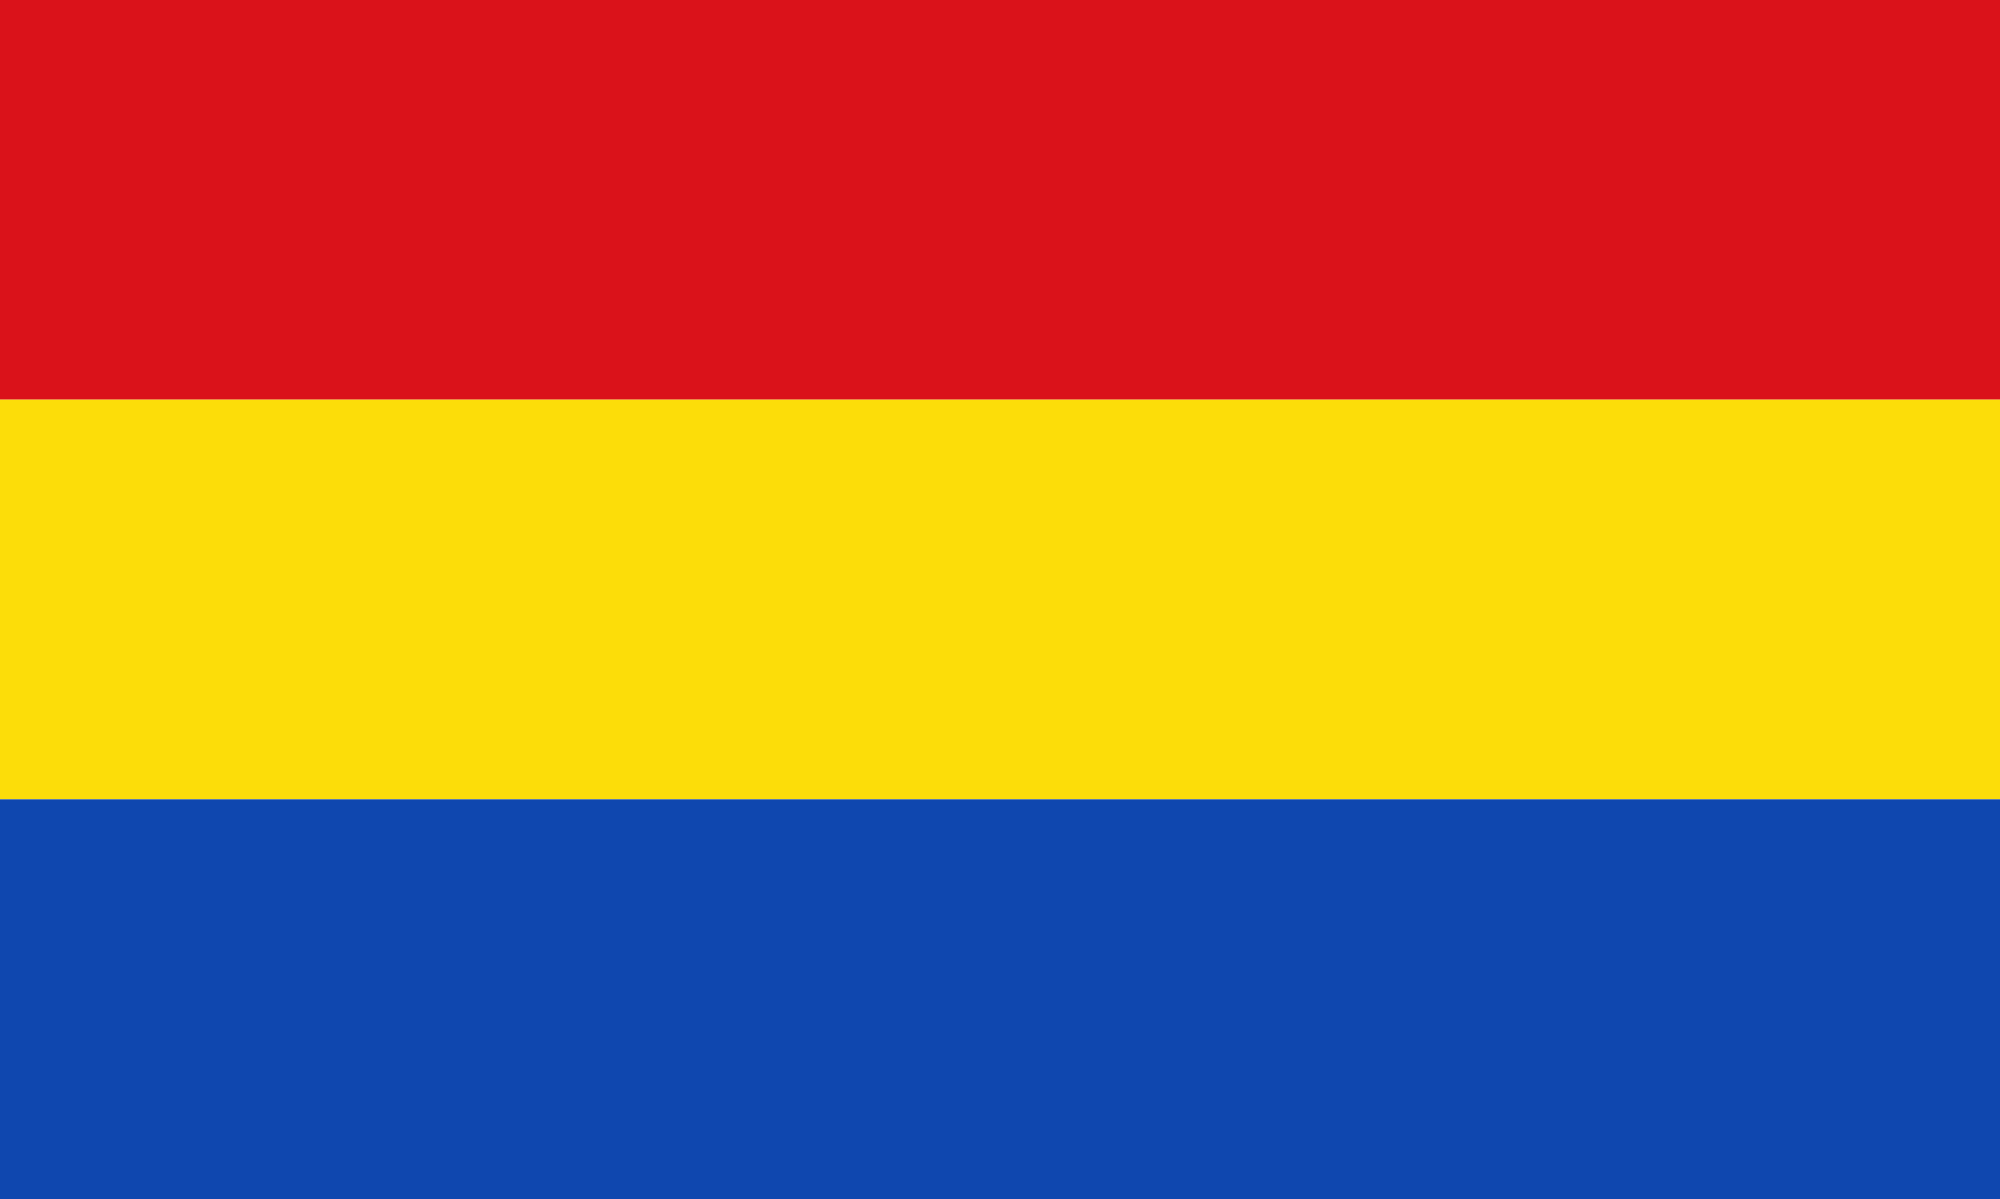 Red Yellow Blue Logo - File:Flag red yellow blue 5x3.svg - Wikimedia Commons